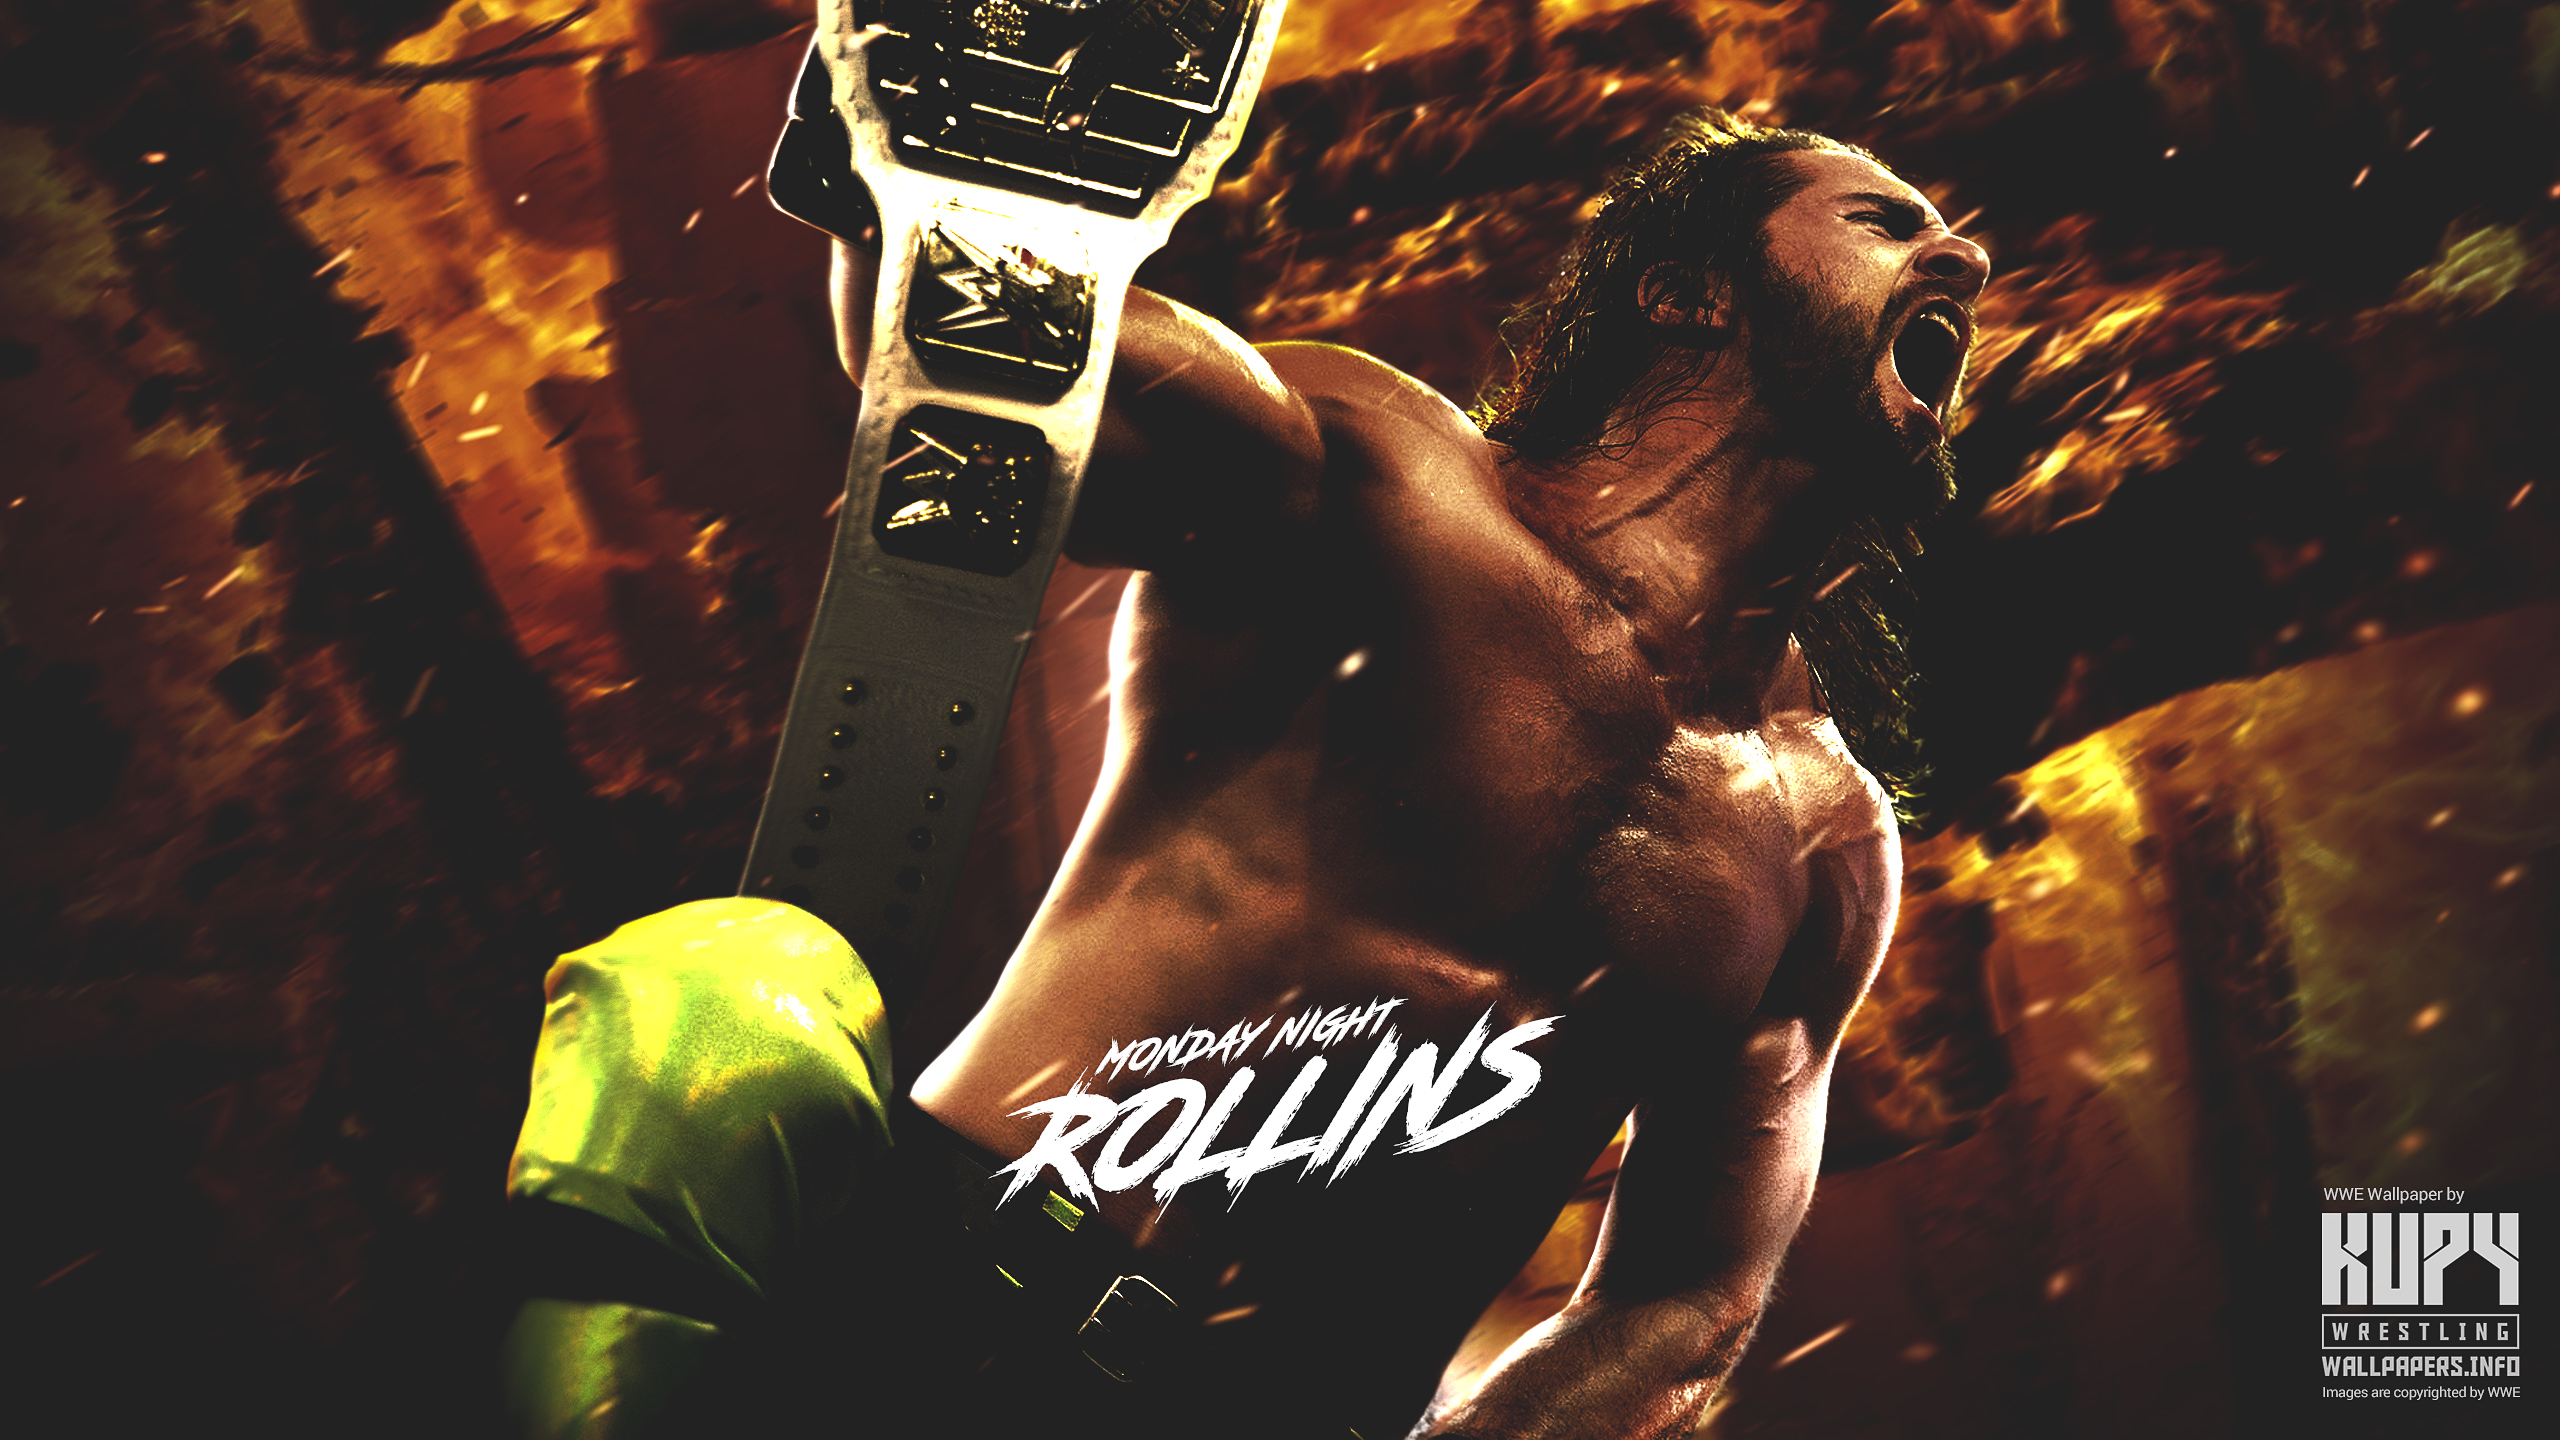 2560x1440 Seth Rollins Archives Page 2 of 4 Kupy Wrestling Wallpapers